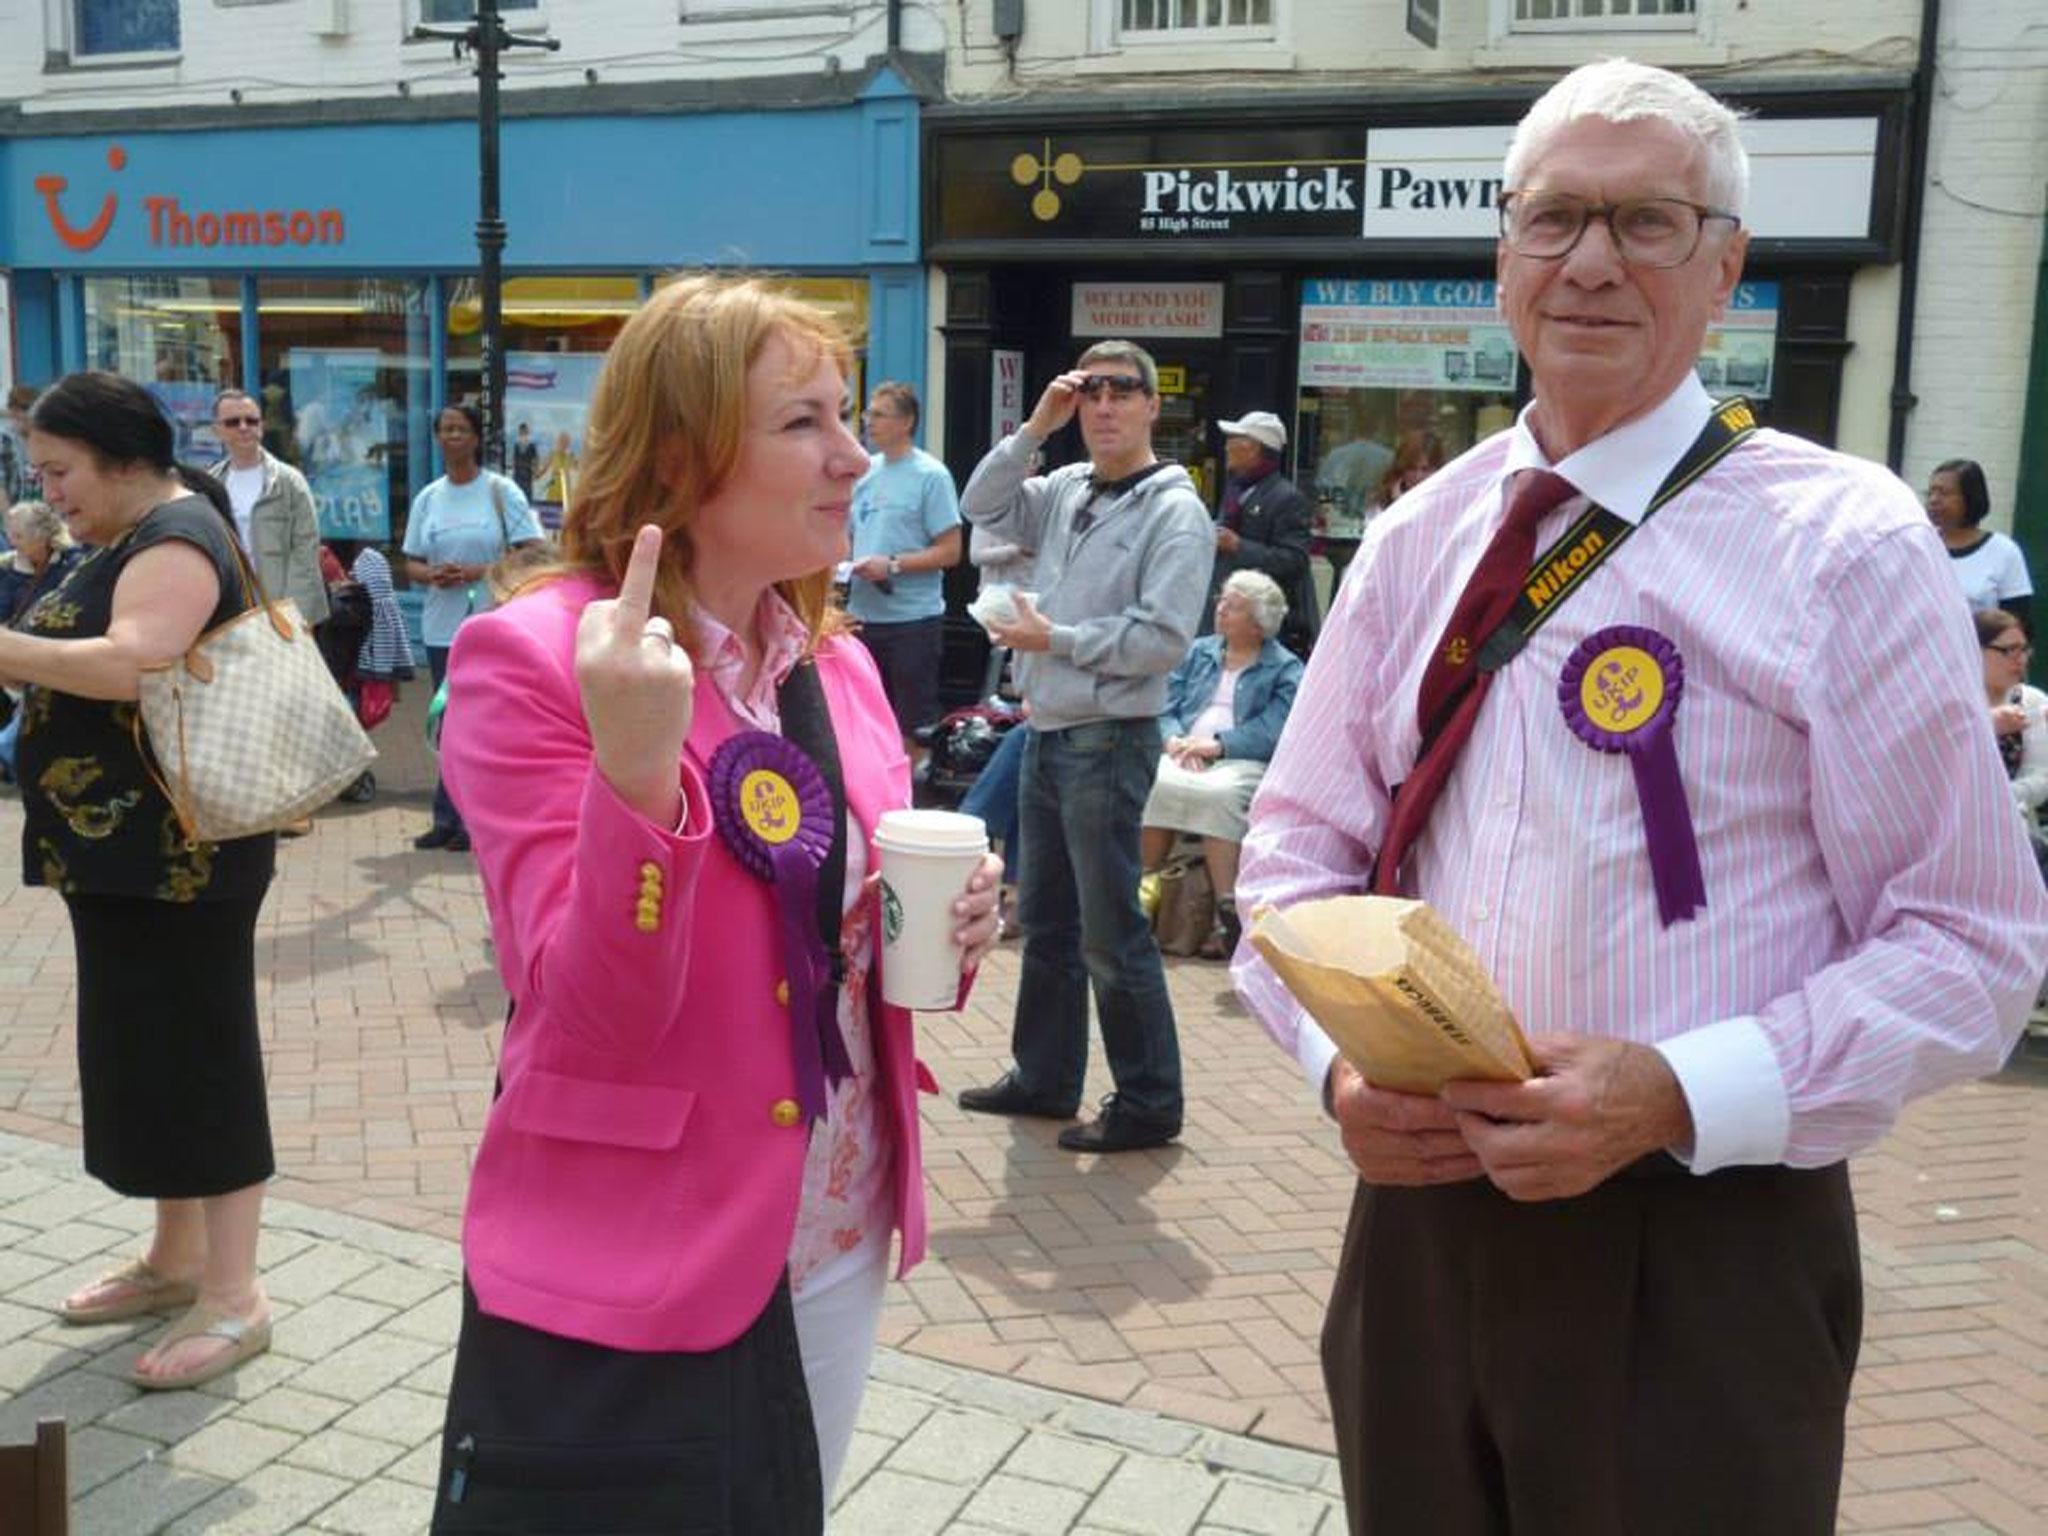 Ms Atkinson was pictured swearing at local activists in Kent in May last year